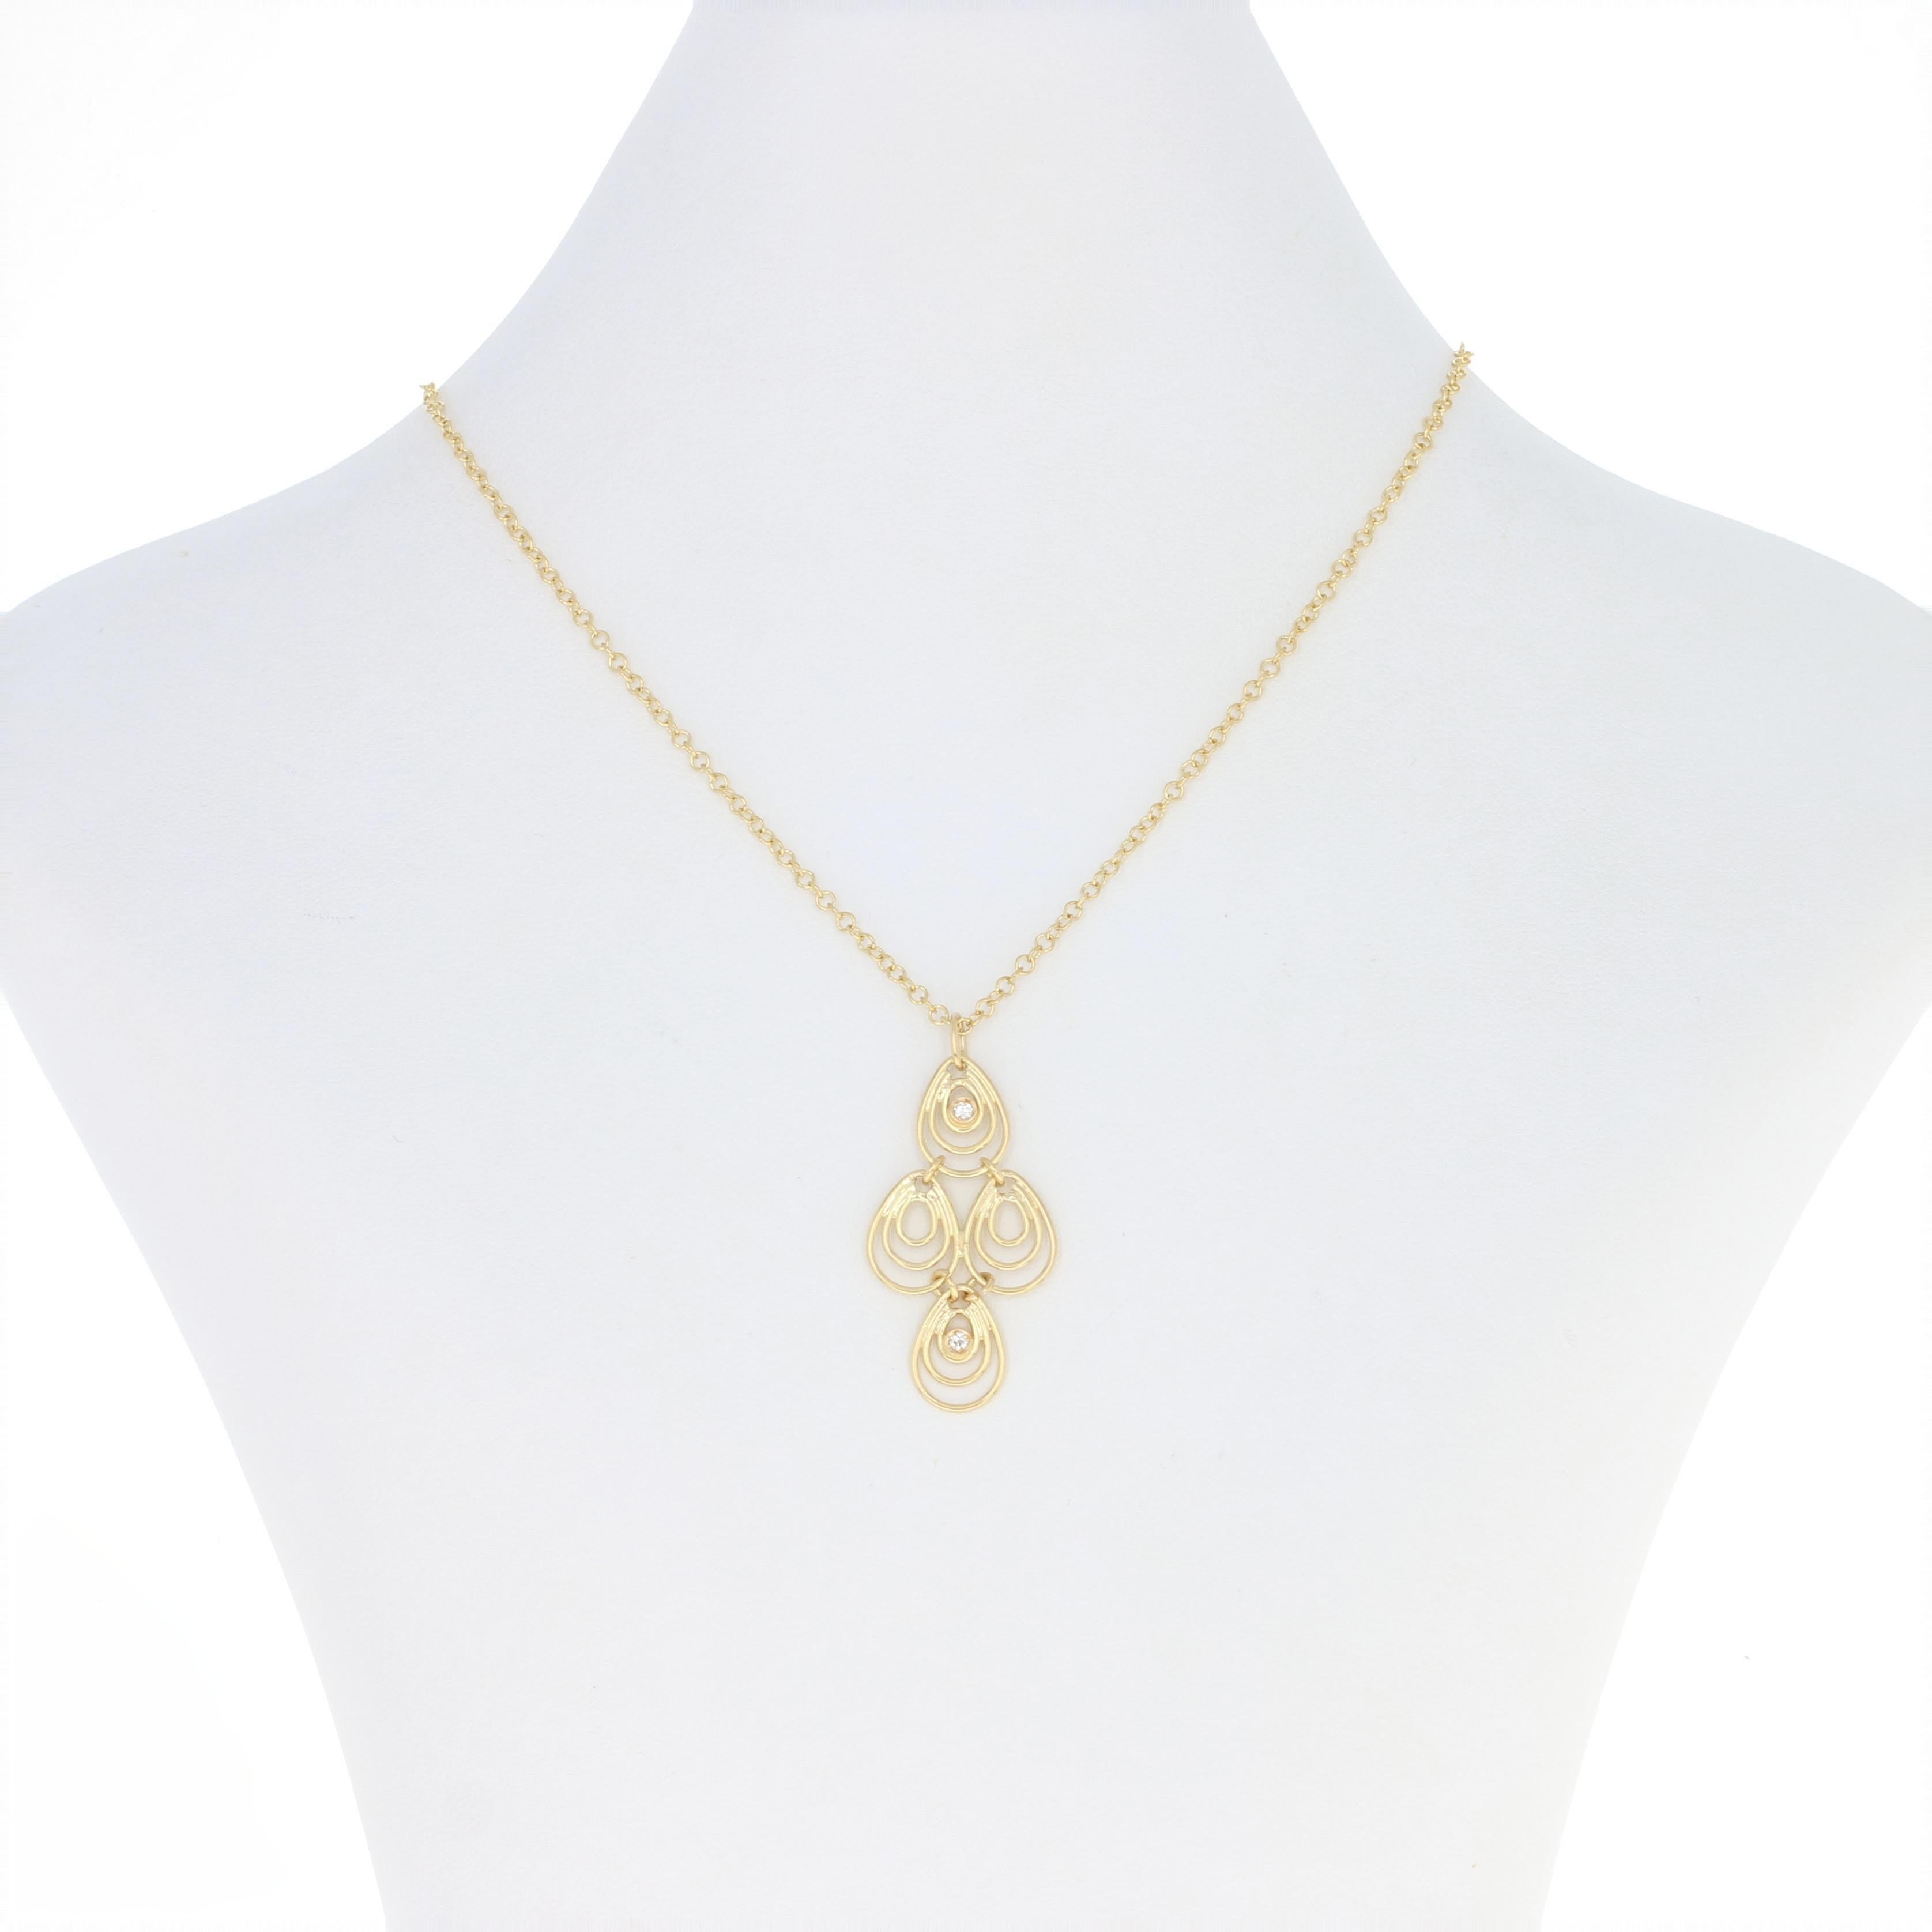 Get ready to shine from day to night wearing this beautiful creation by Roberto Coin! Part of the Mauresque Collection, this Teardrop pendant necklace is composed of luxurious 18k yellow gold and features two white diamonds for a kiss of sparkle.